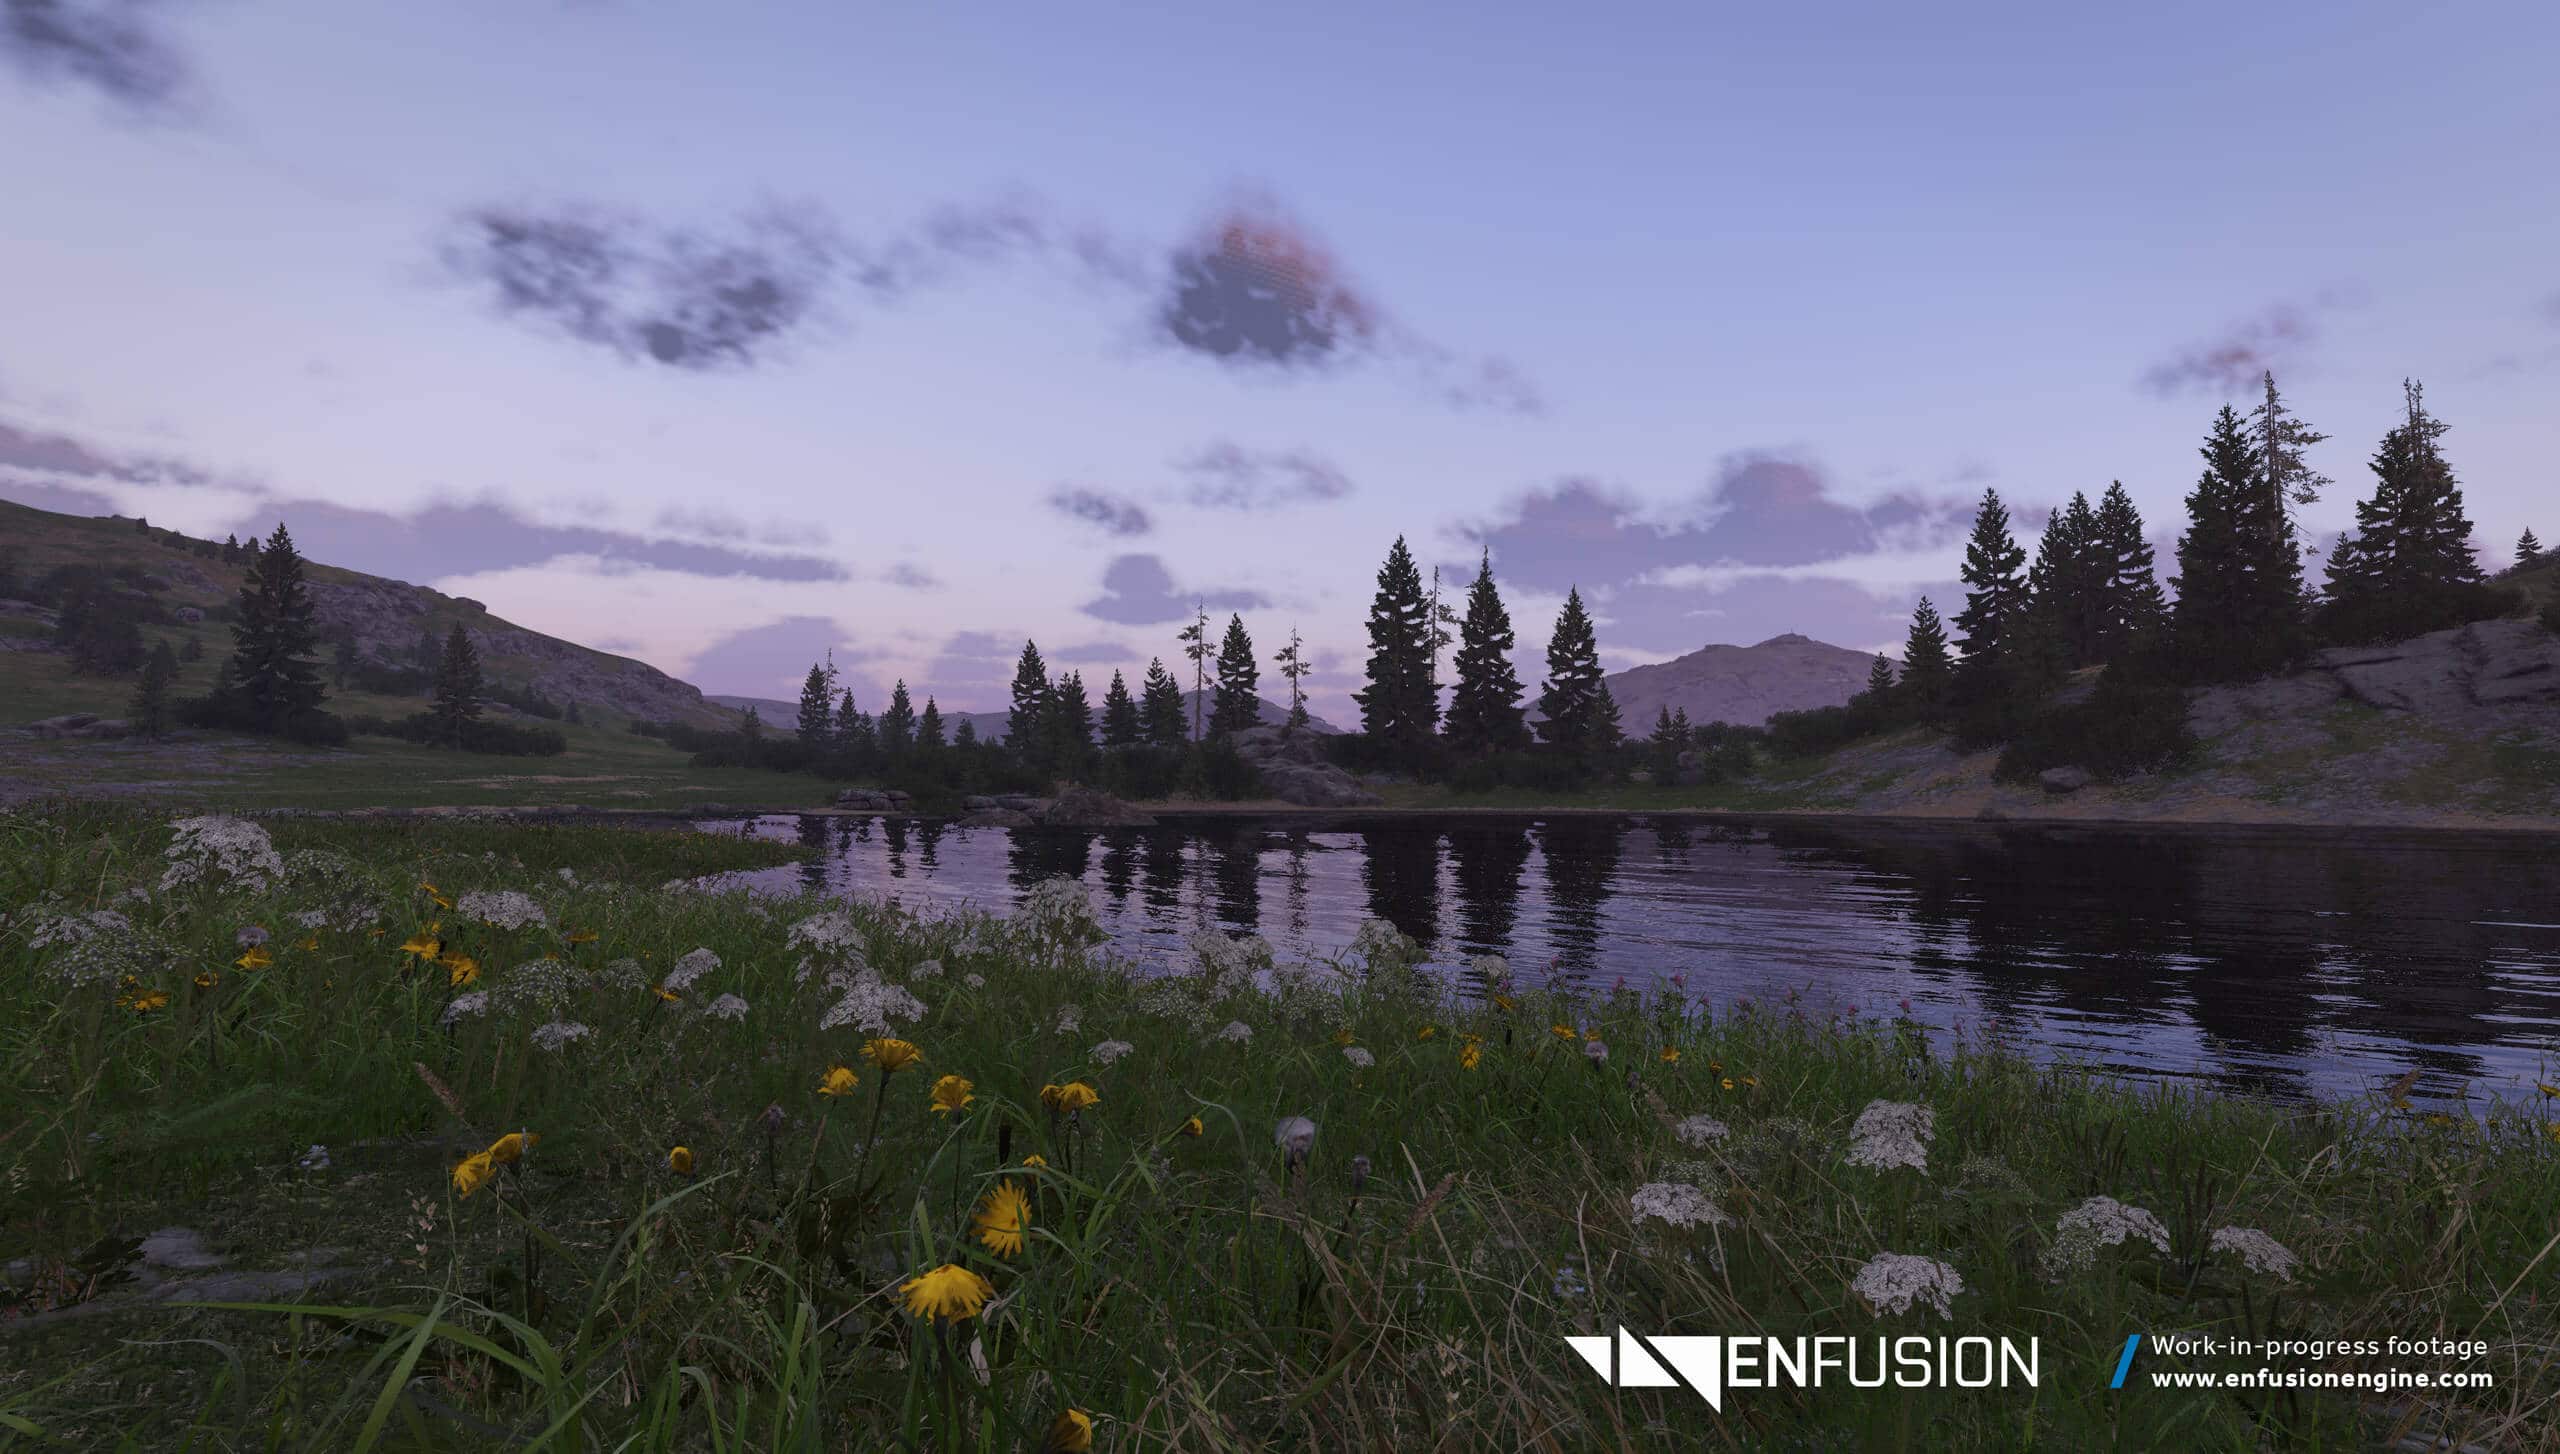 Bohemia Interactive shows what its Enfusion graphics engine is capable of